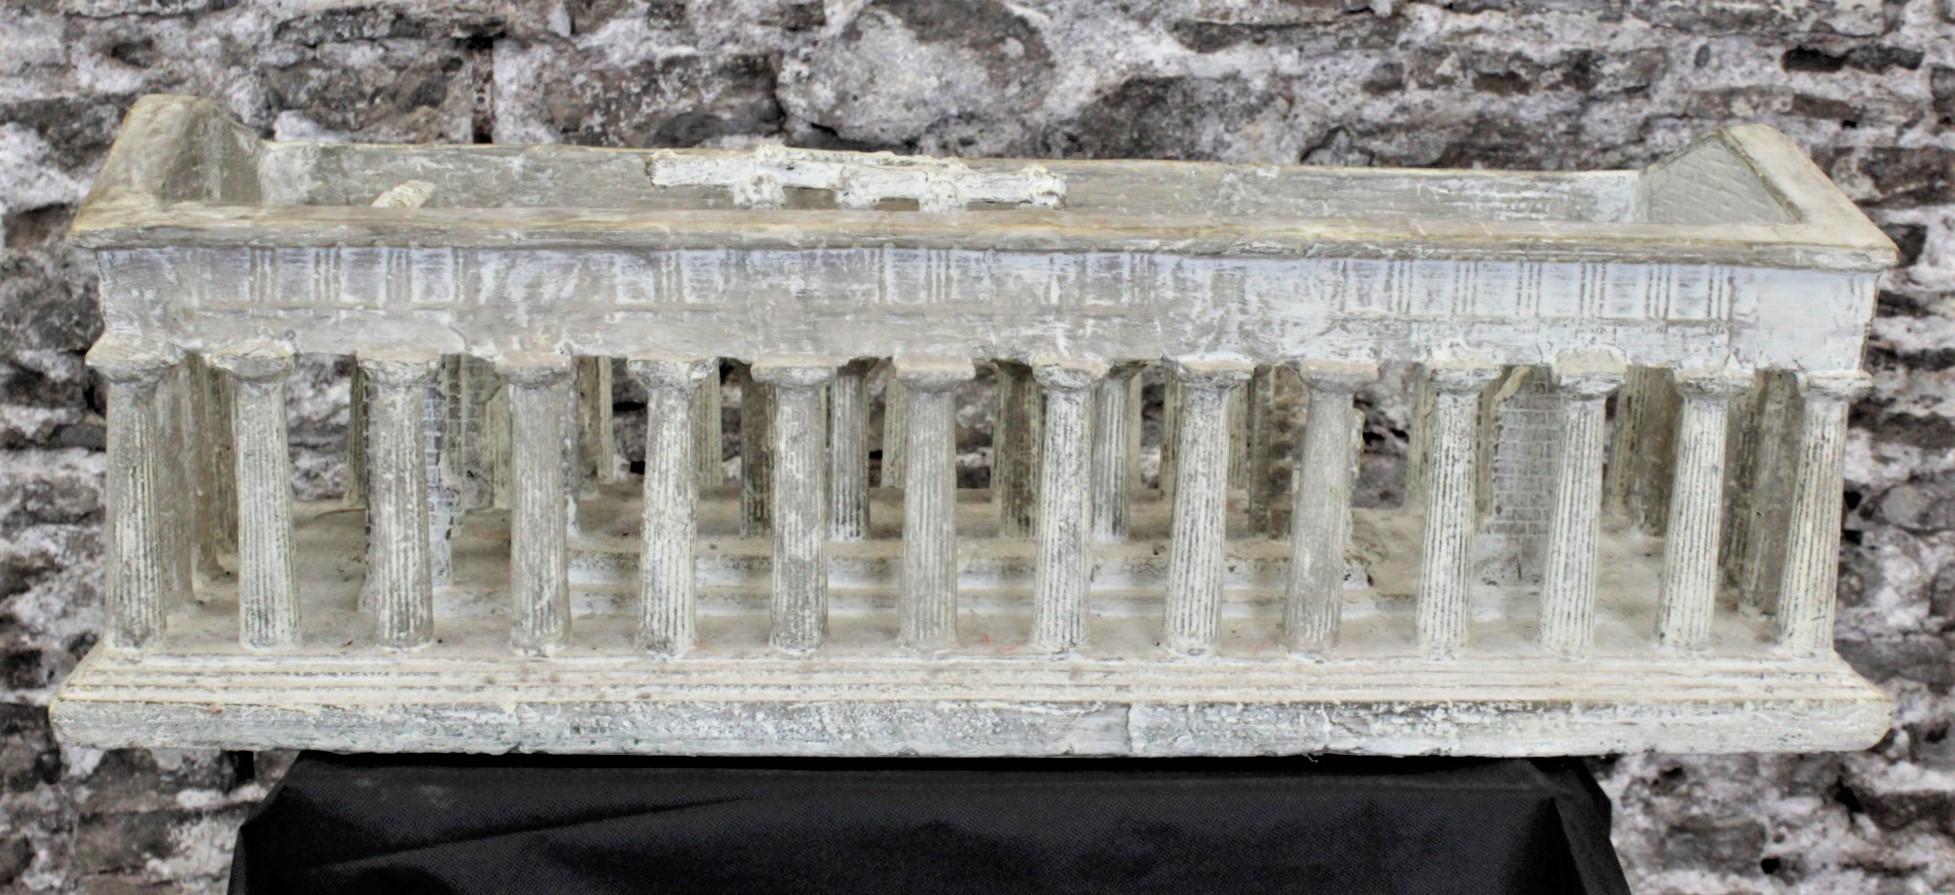 Italian Vintage Large Ancient Greek Temple Ruins Architectural Model or Sculpture